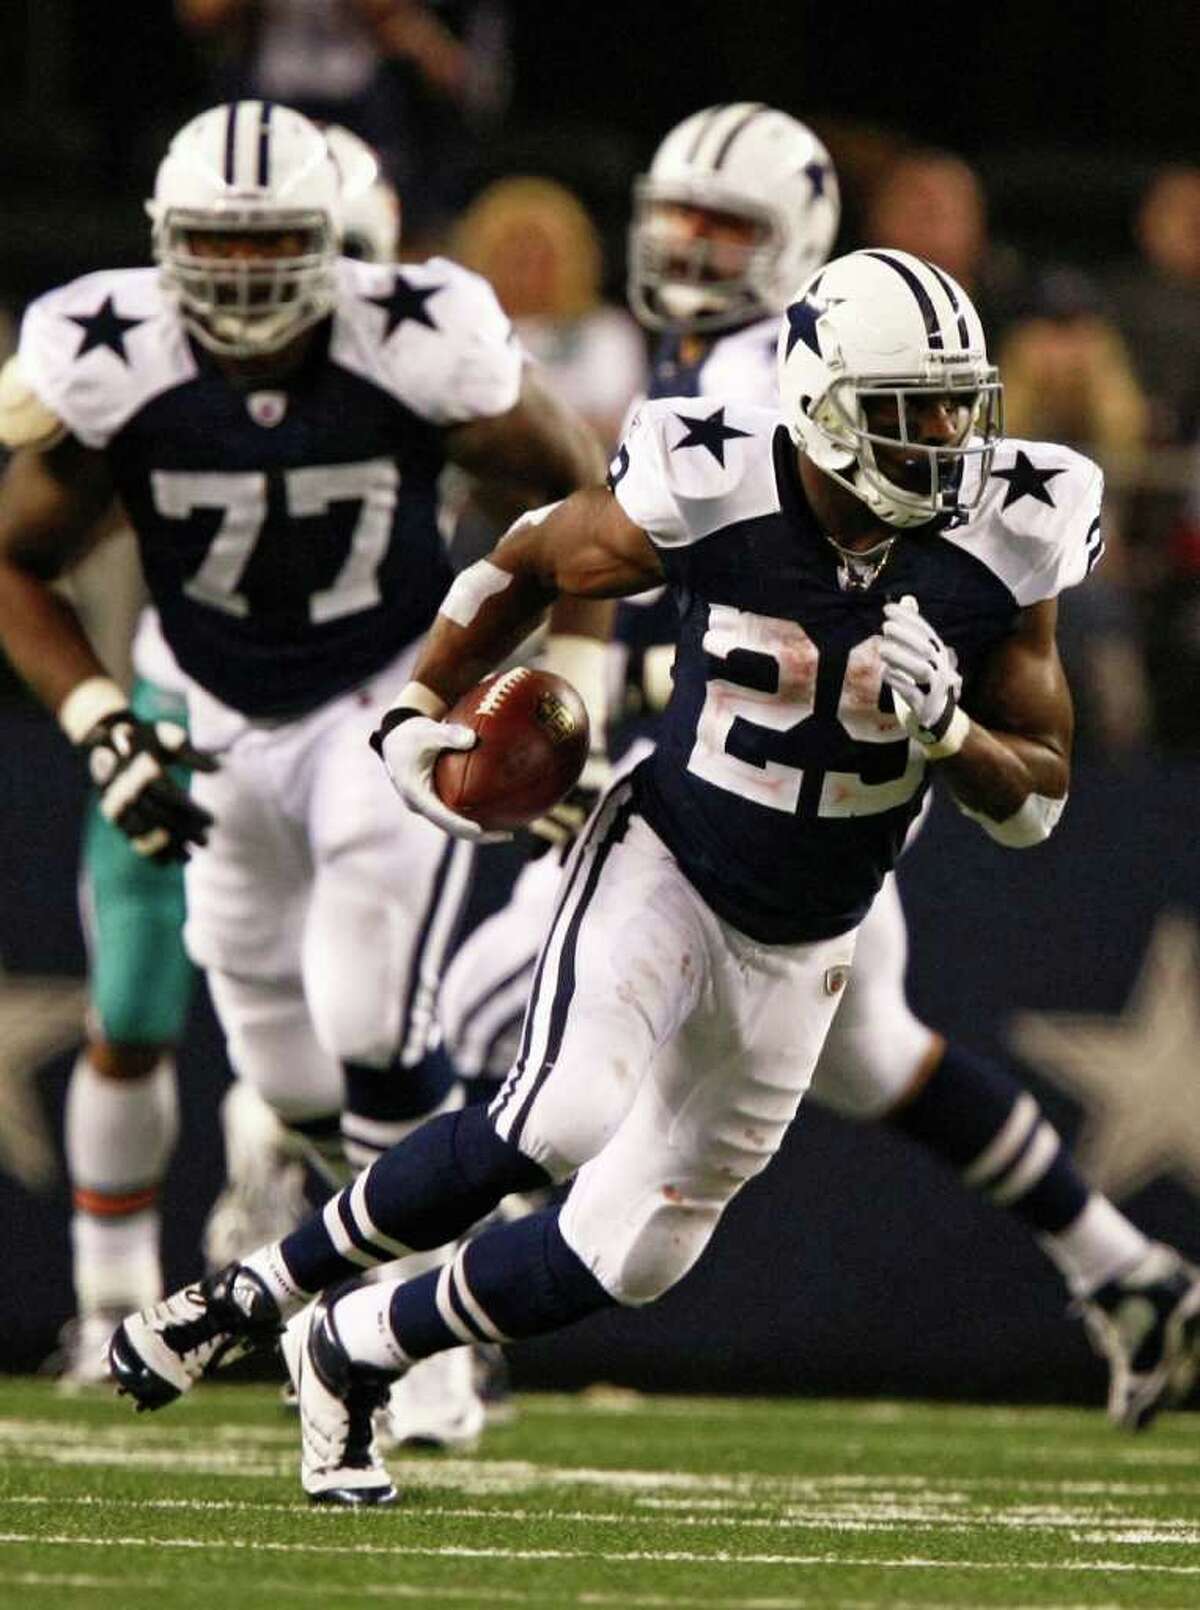 Dallas Cowboys running back DeMarco Murray (29) rushes for a first down during the second half of an NFL football game Thursday, Nov. 24, 2011, in Arlington, Texas.